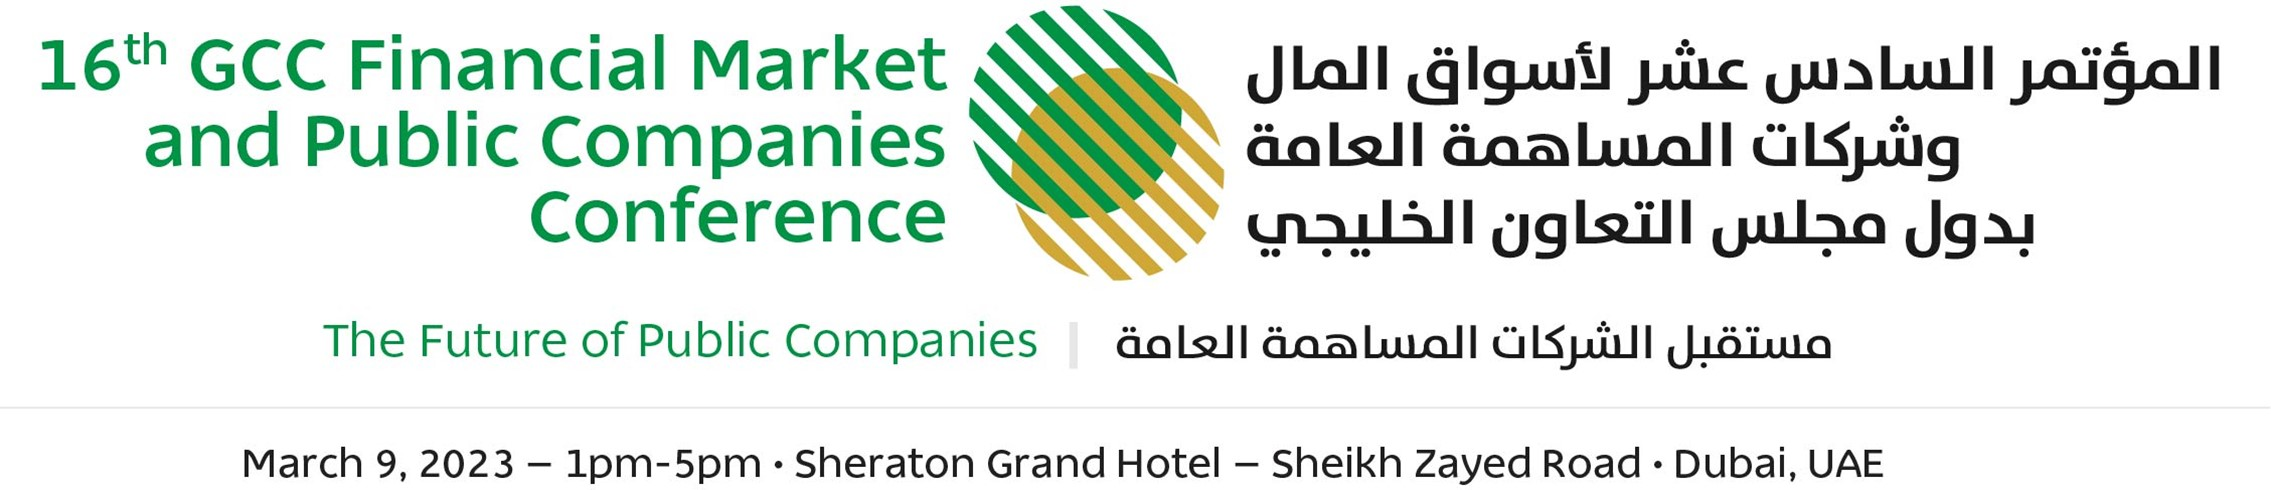 16th GCC Financial Markets and Public Companies Conference 